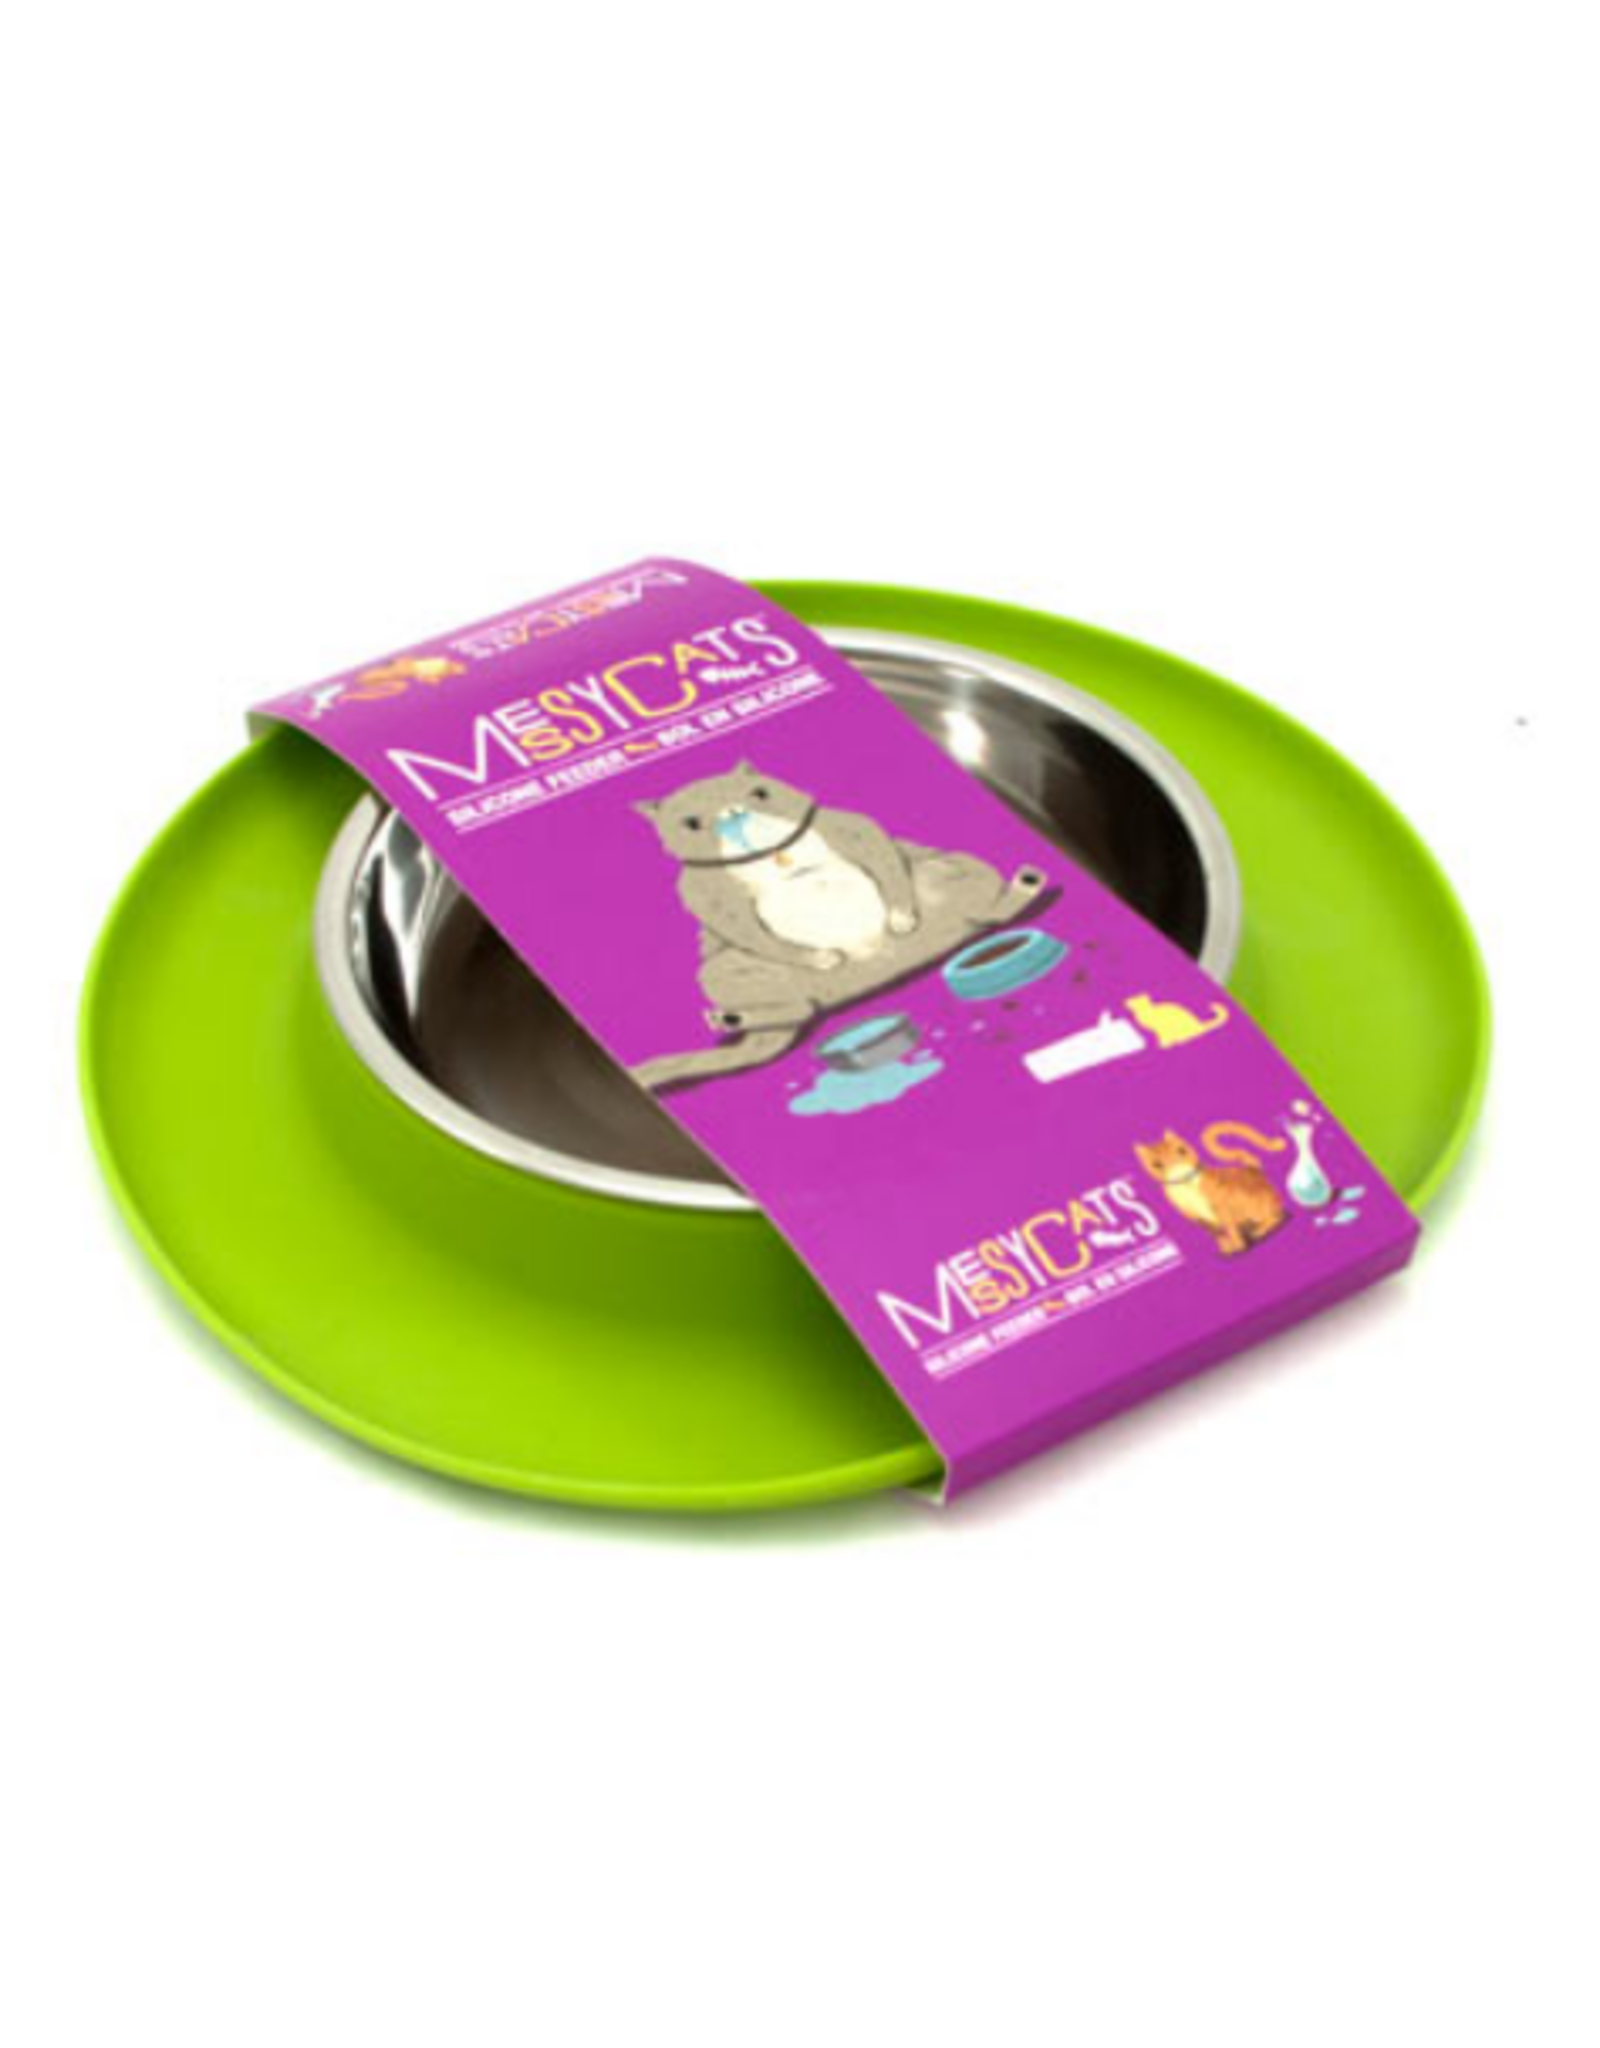 Messy Cats Messy Cats Single Silicone Feeder with Stainless Saucer Shaped Bowl